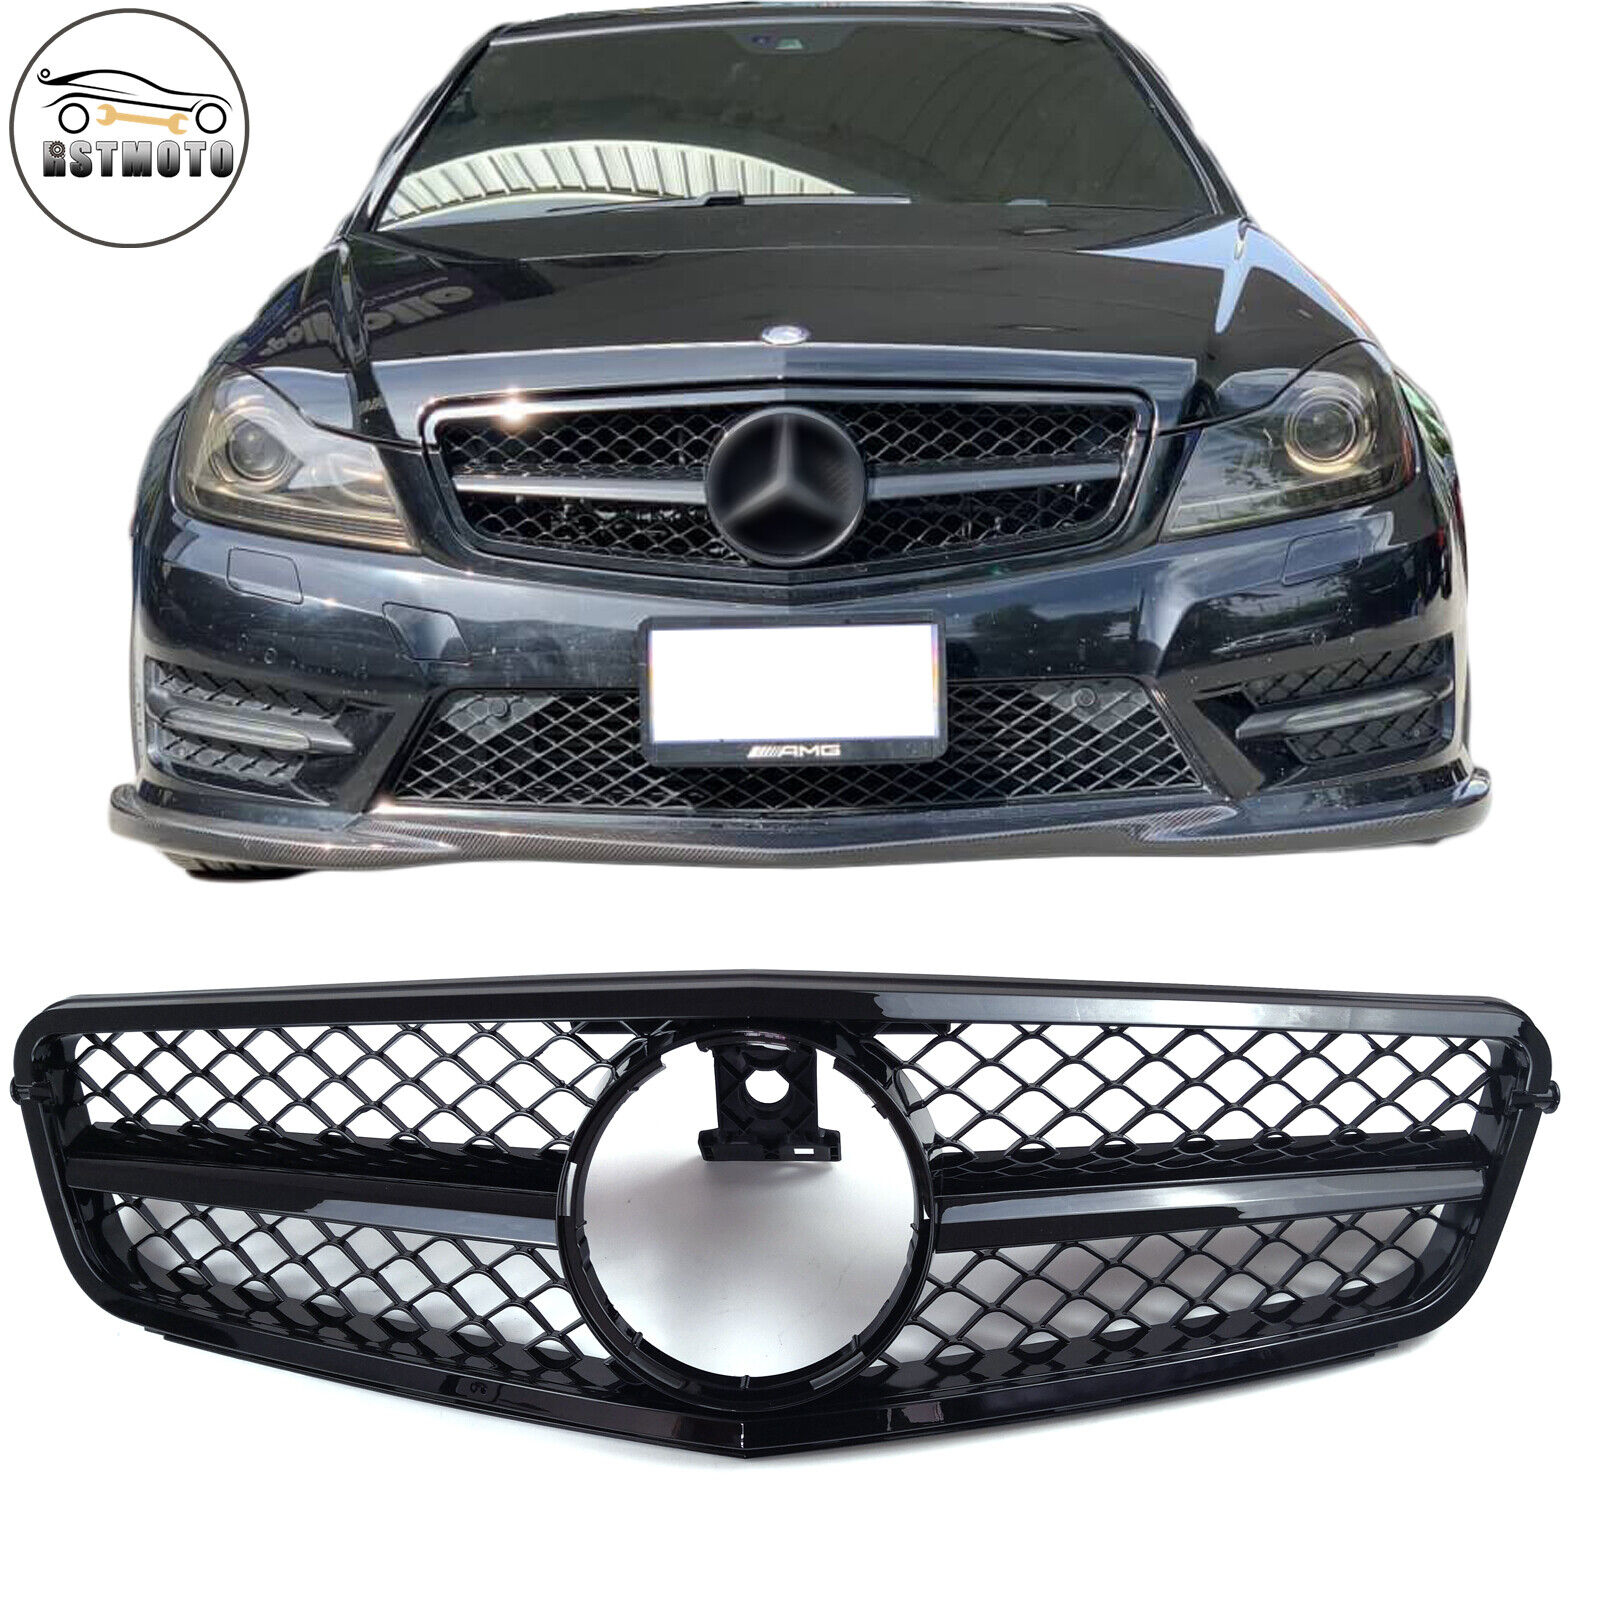 AMG Style All Black Grill Grille For Mercedes Benz W204 C250 C300 C350 2008-2013